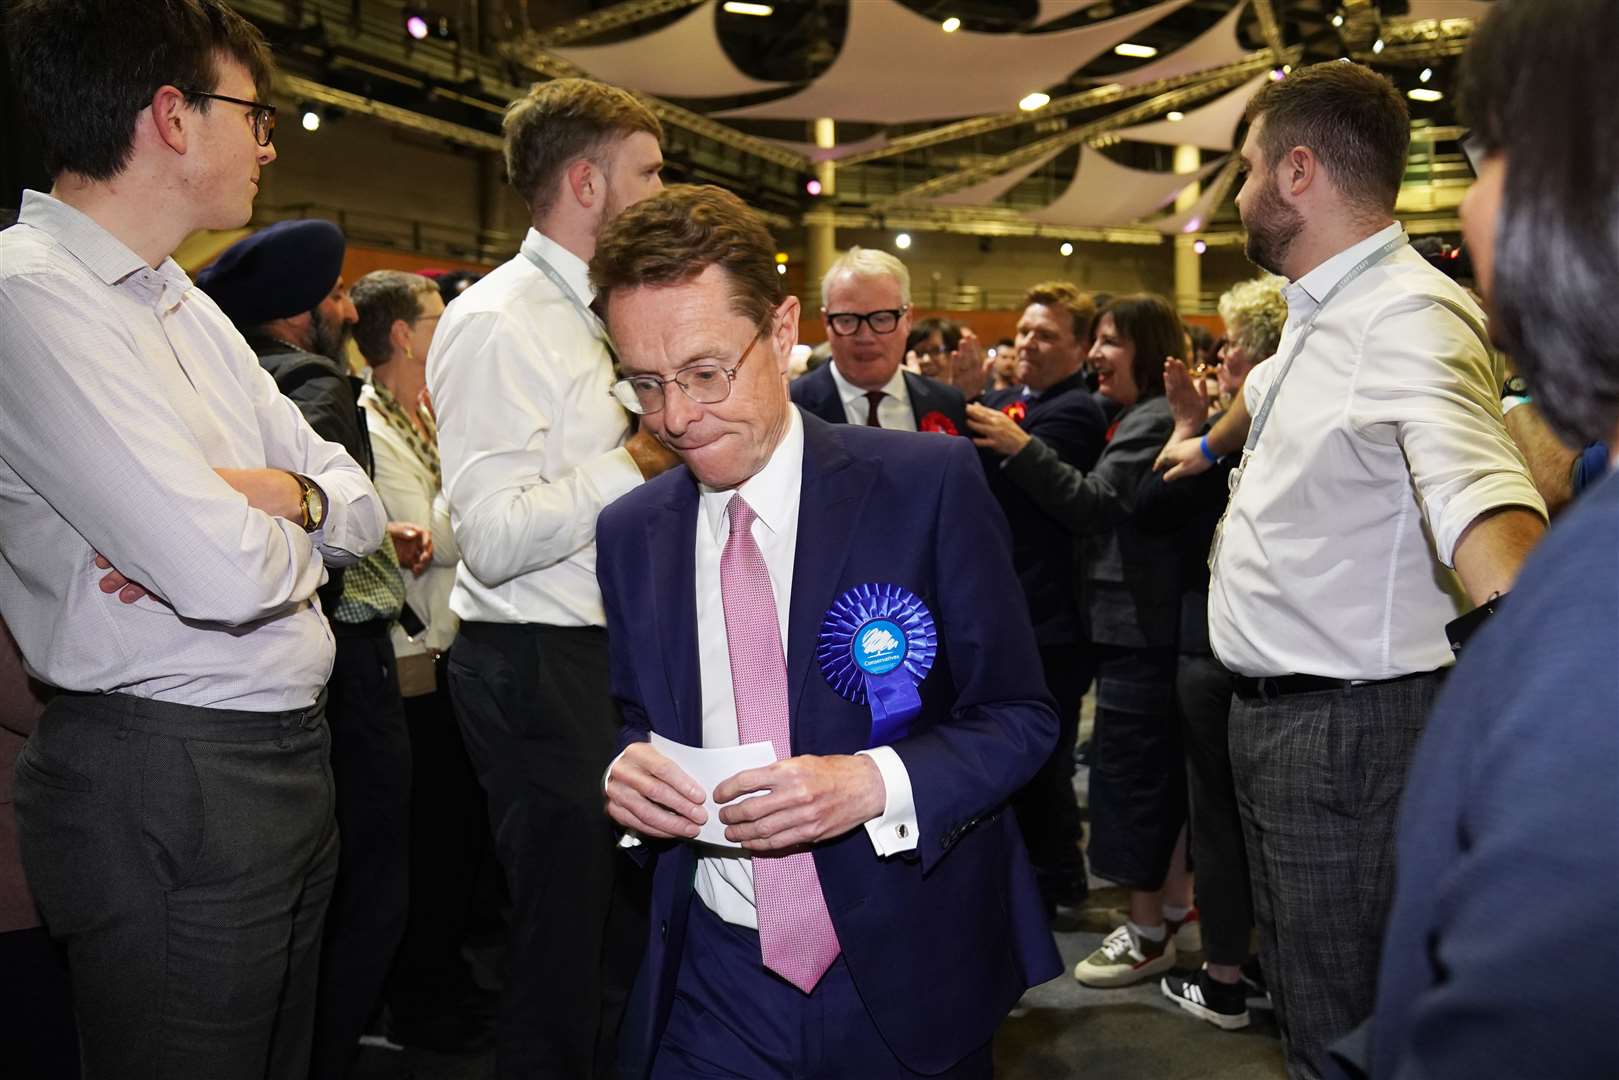 Andy Street was unseated as West Midlands mayor by Labour in a shock defeat for the Tories (Jacob King/PA)